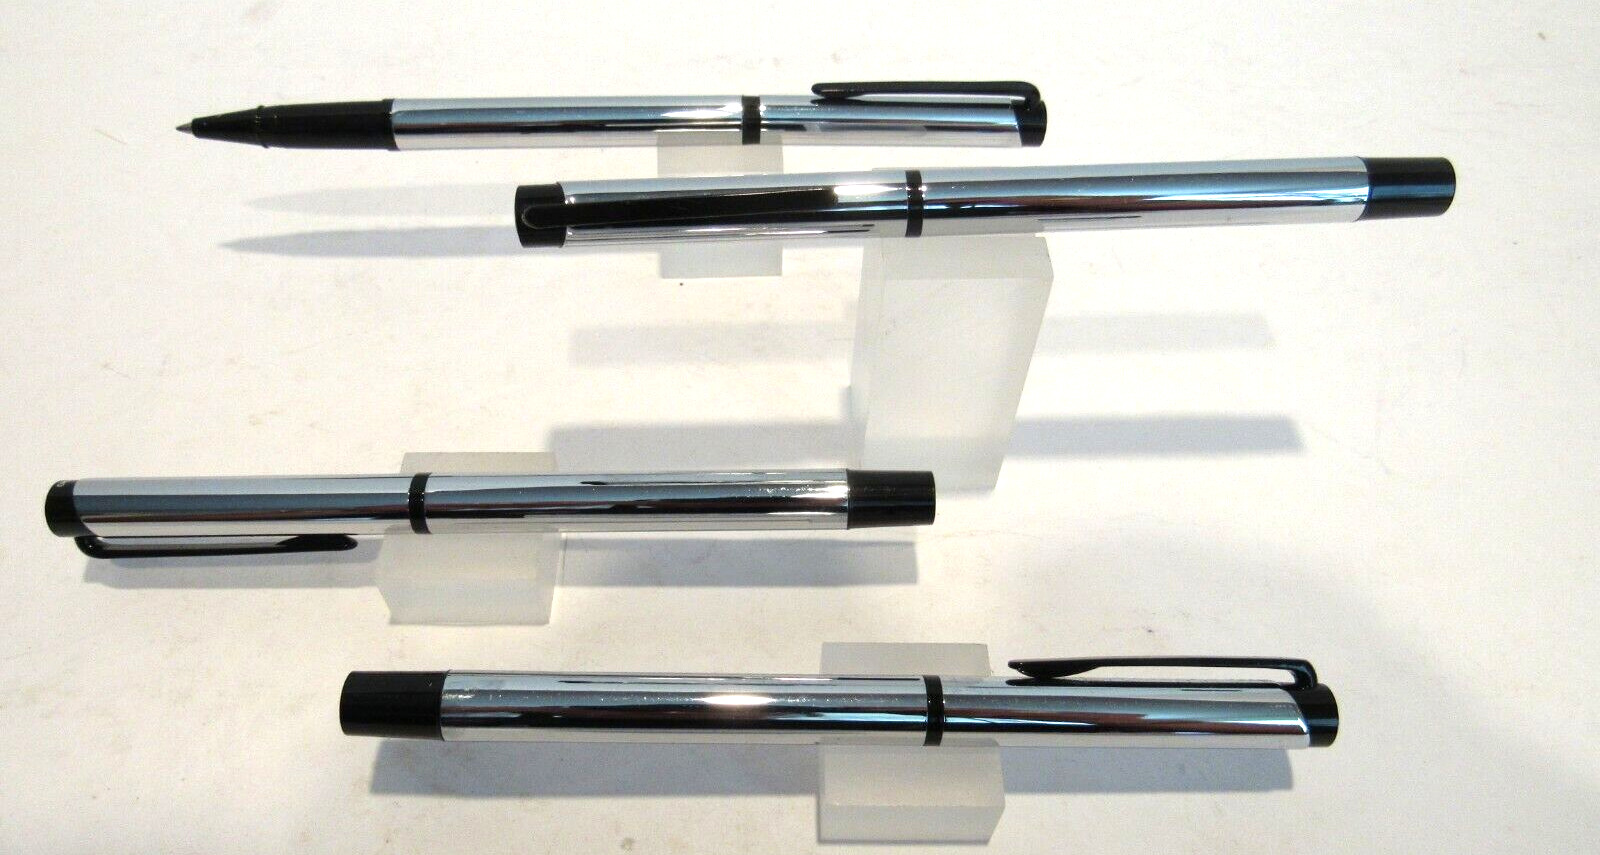 LOT OF 4 TERZETTI PACIFIC SLIM METAL CHROME ROLLERBALL PEN+GIFT POUCH